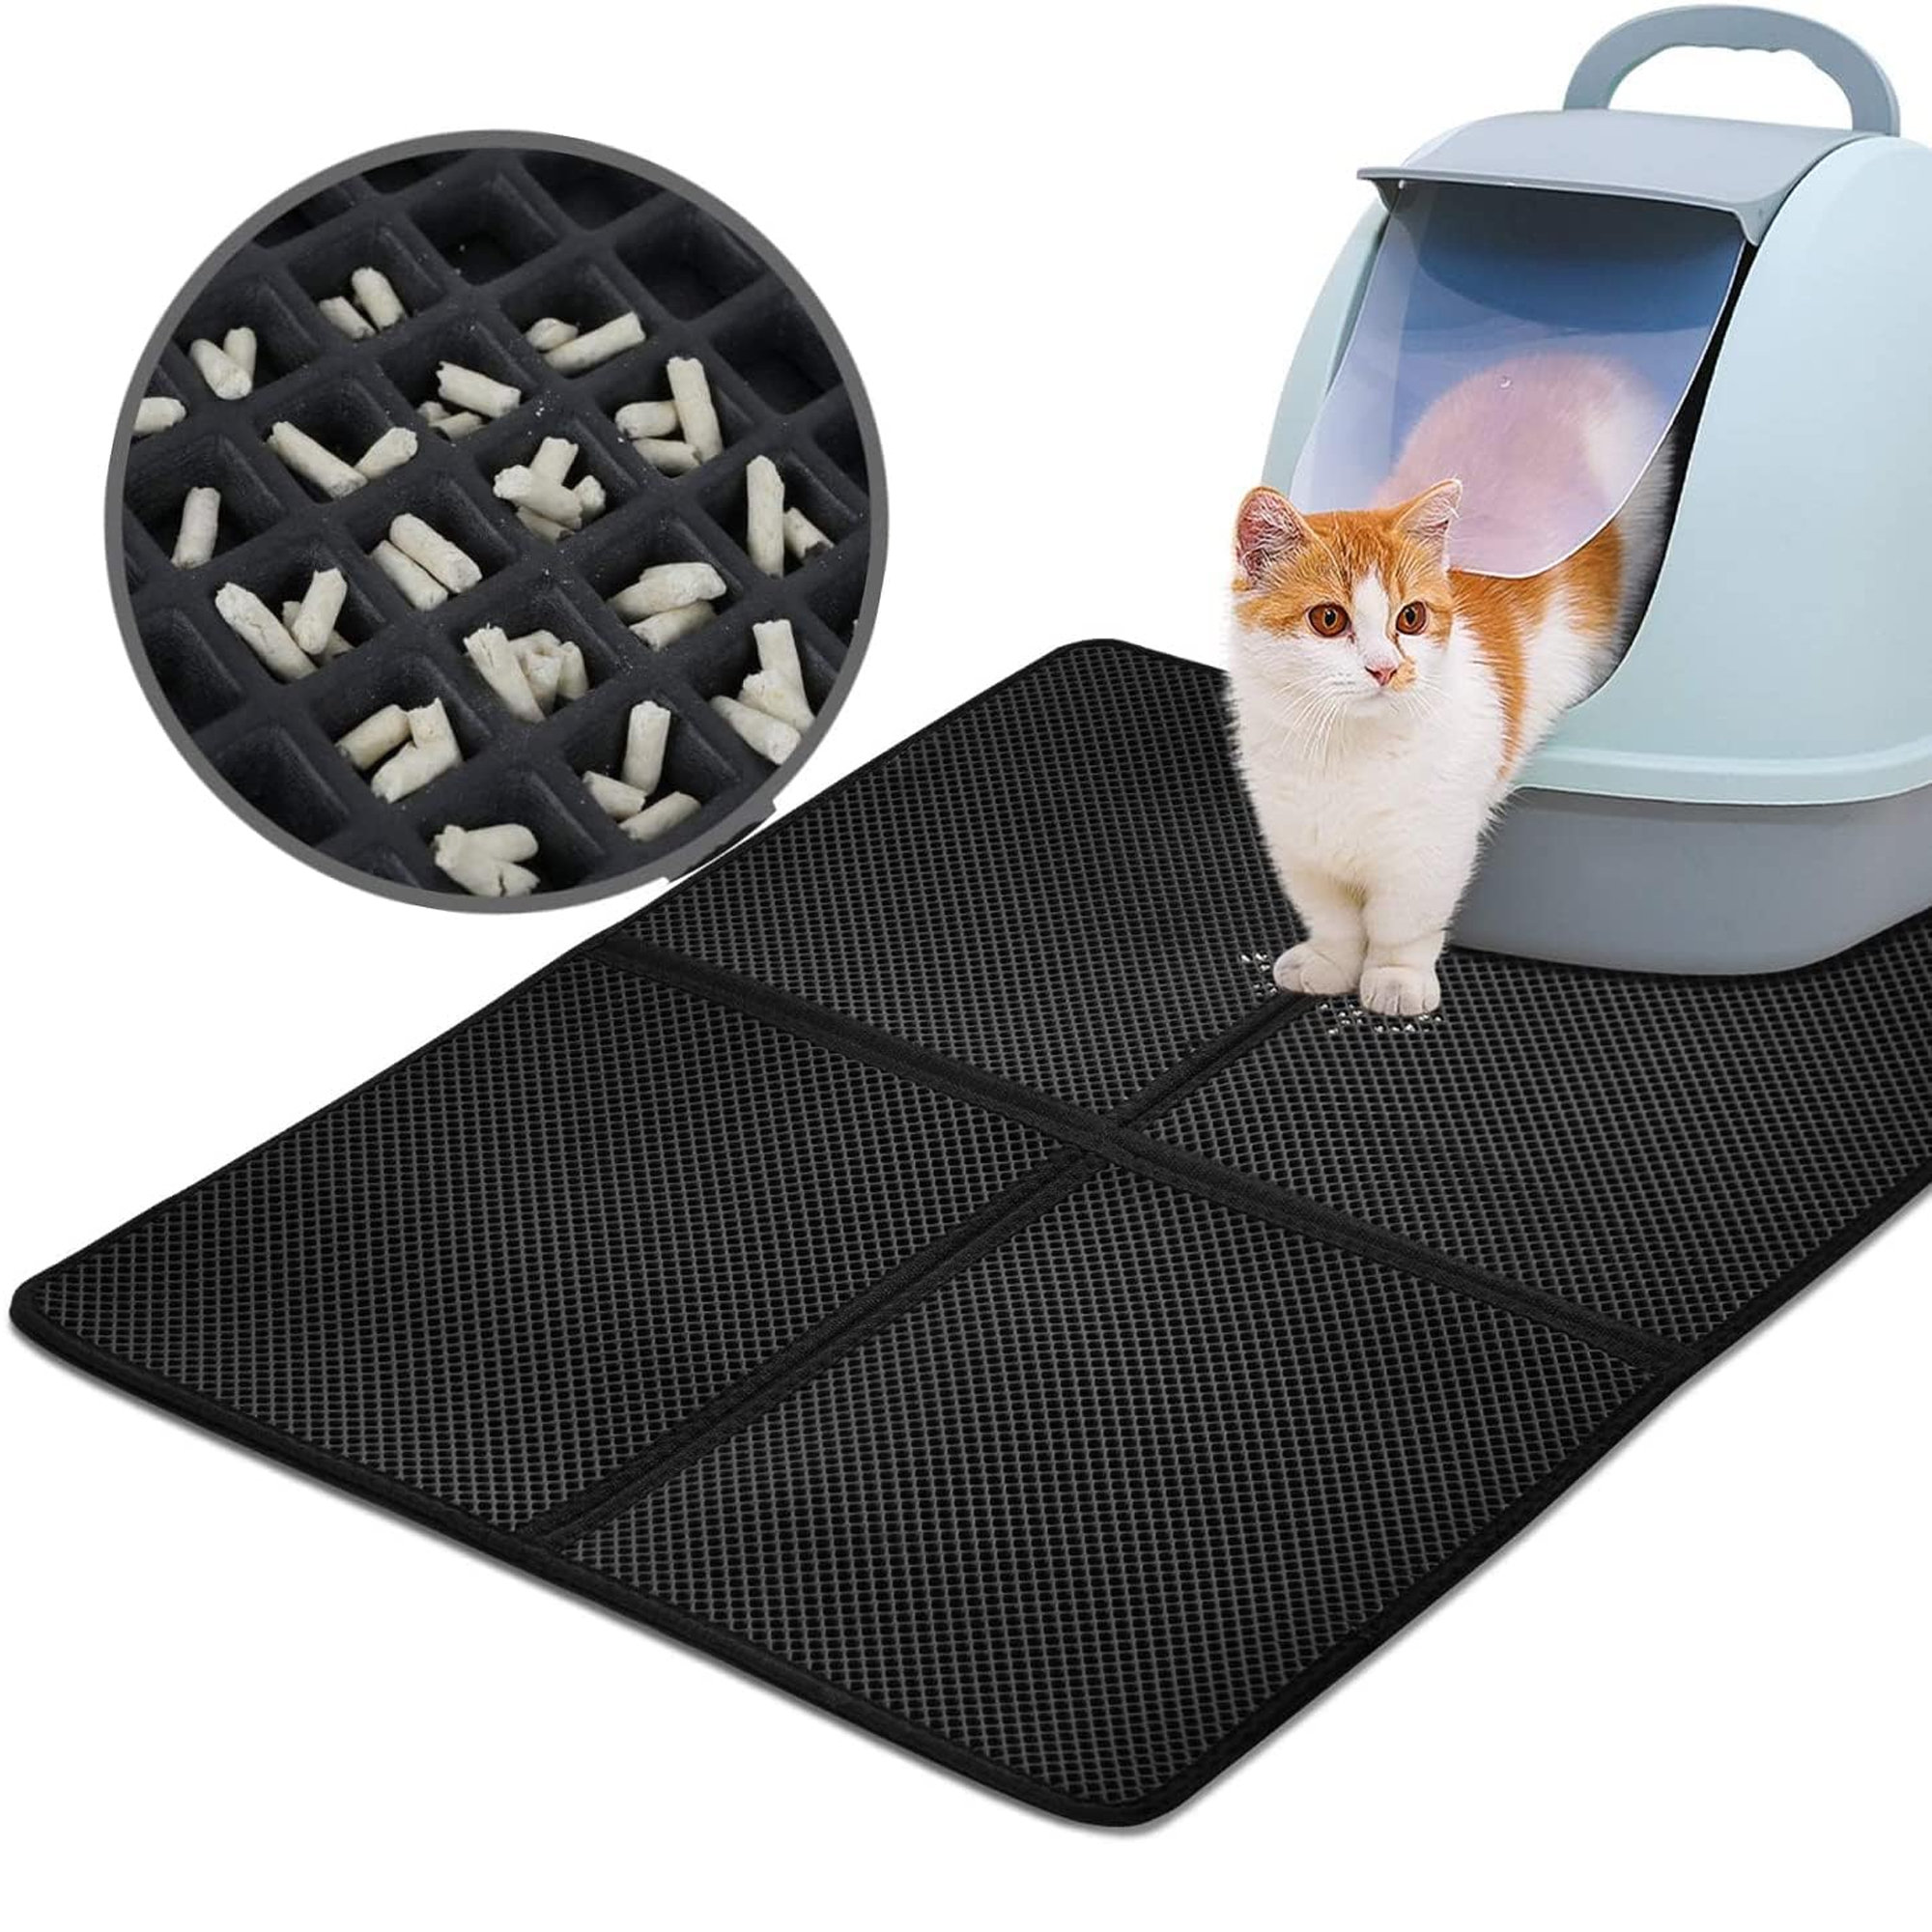 Drymate Plush Litter Trapping Mat For Cat Litter Box, Jumbo Size -  Absorbent/Waterproof/Heavy-Duty & Reviews